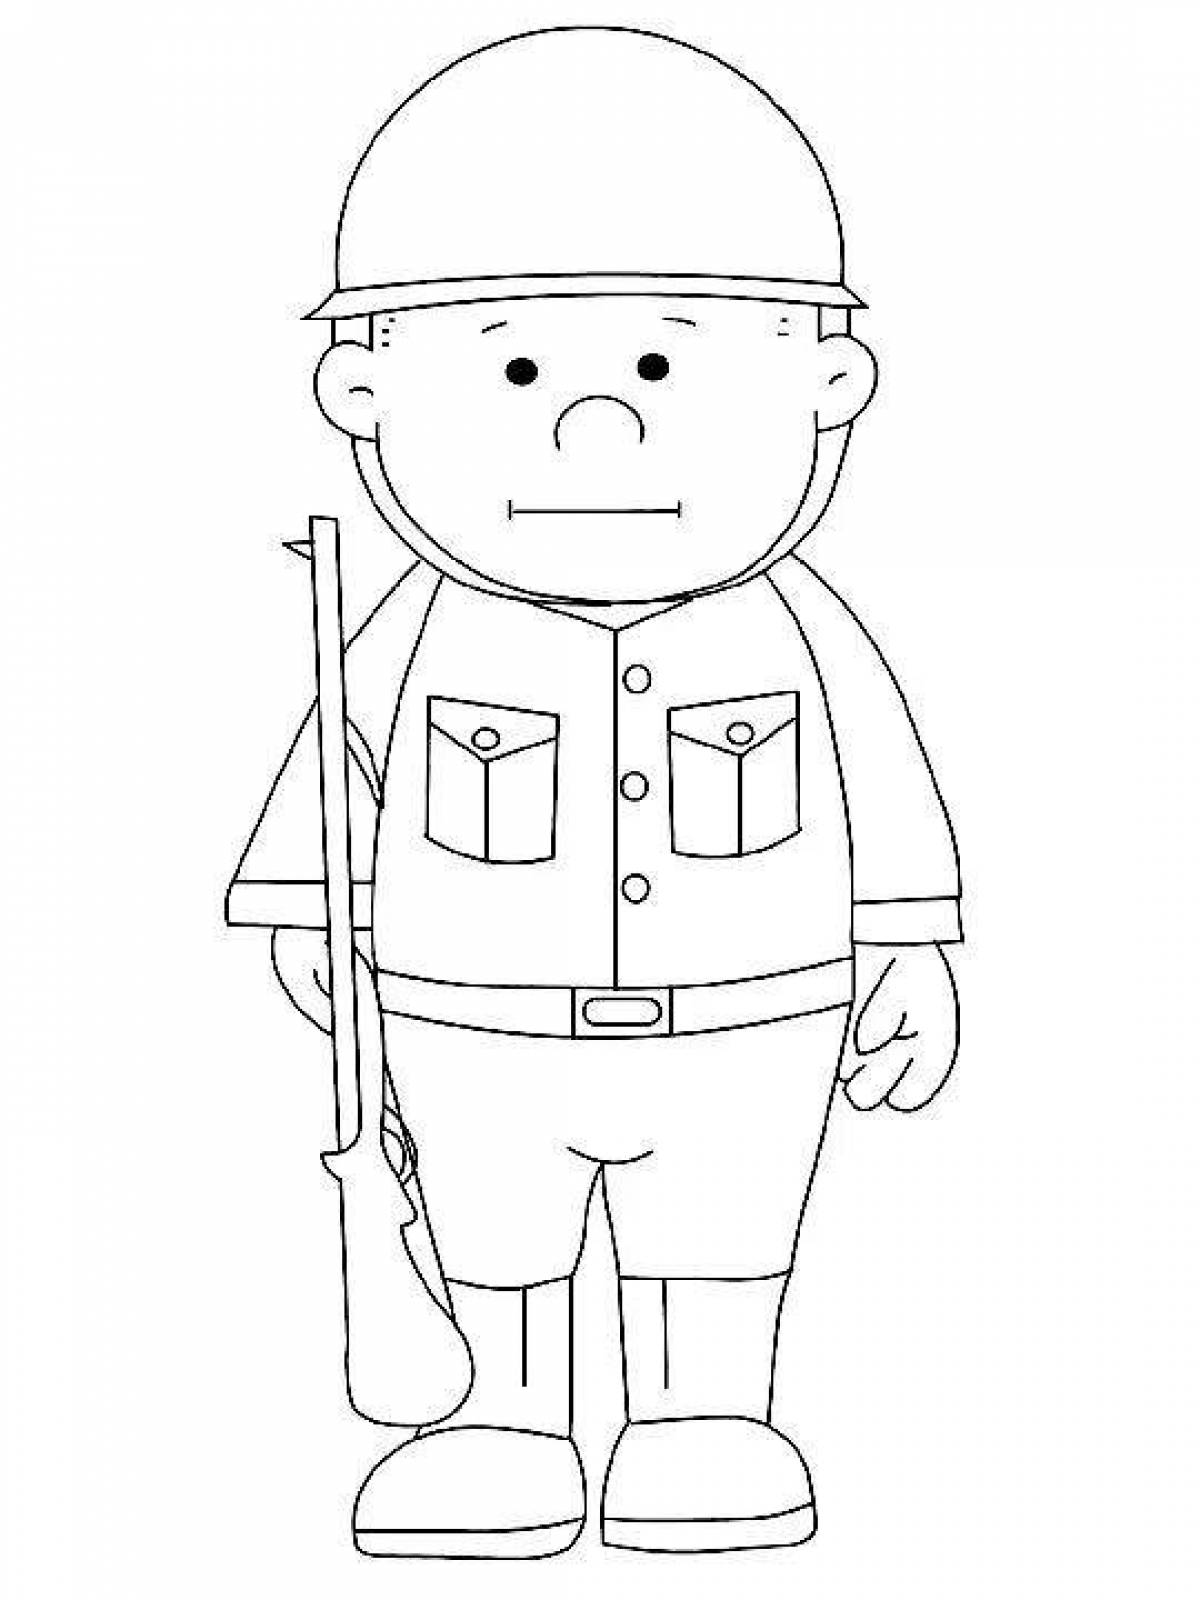 Bright soldier on duty drawing